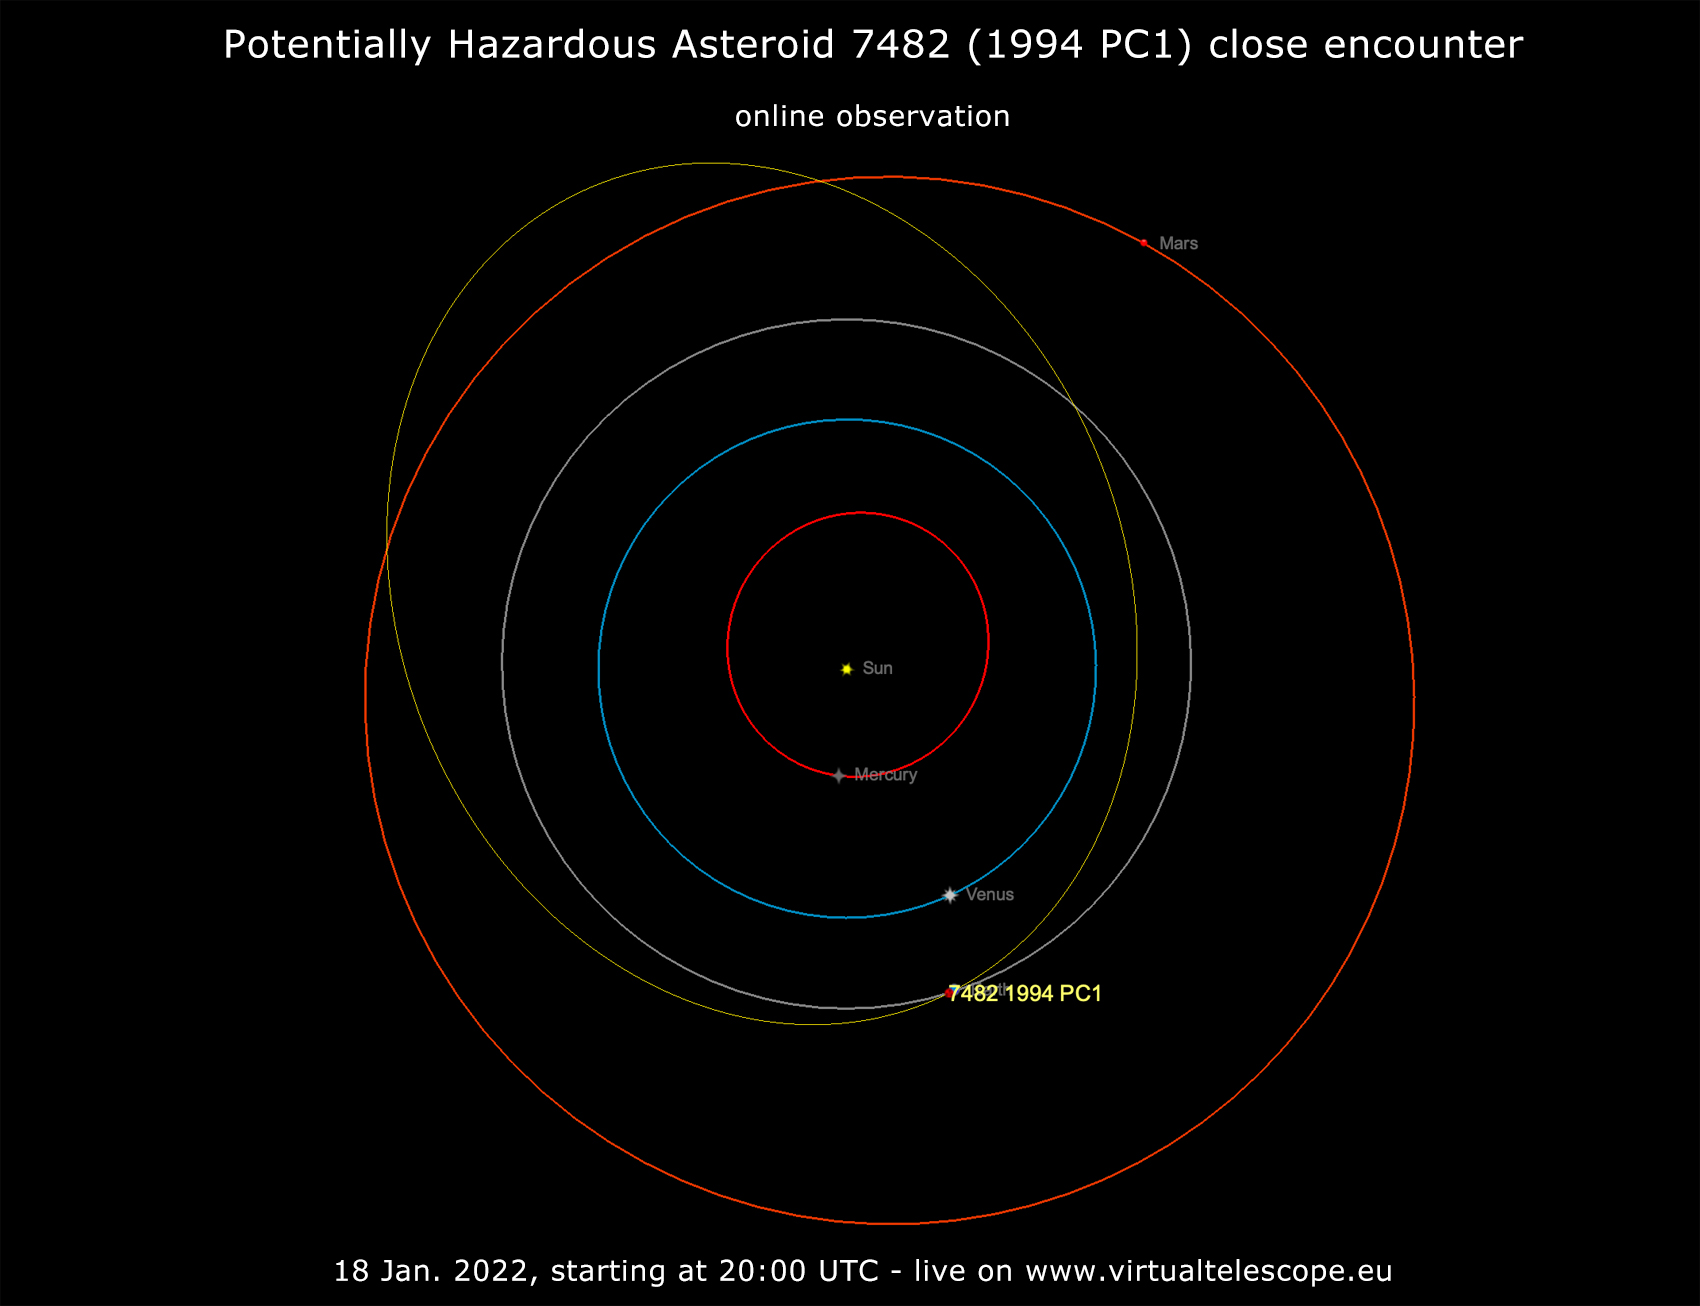 Potentially Hazardous Asteroid (7482) 1994 PC1. Poster of the event.